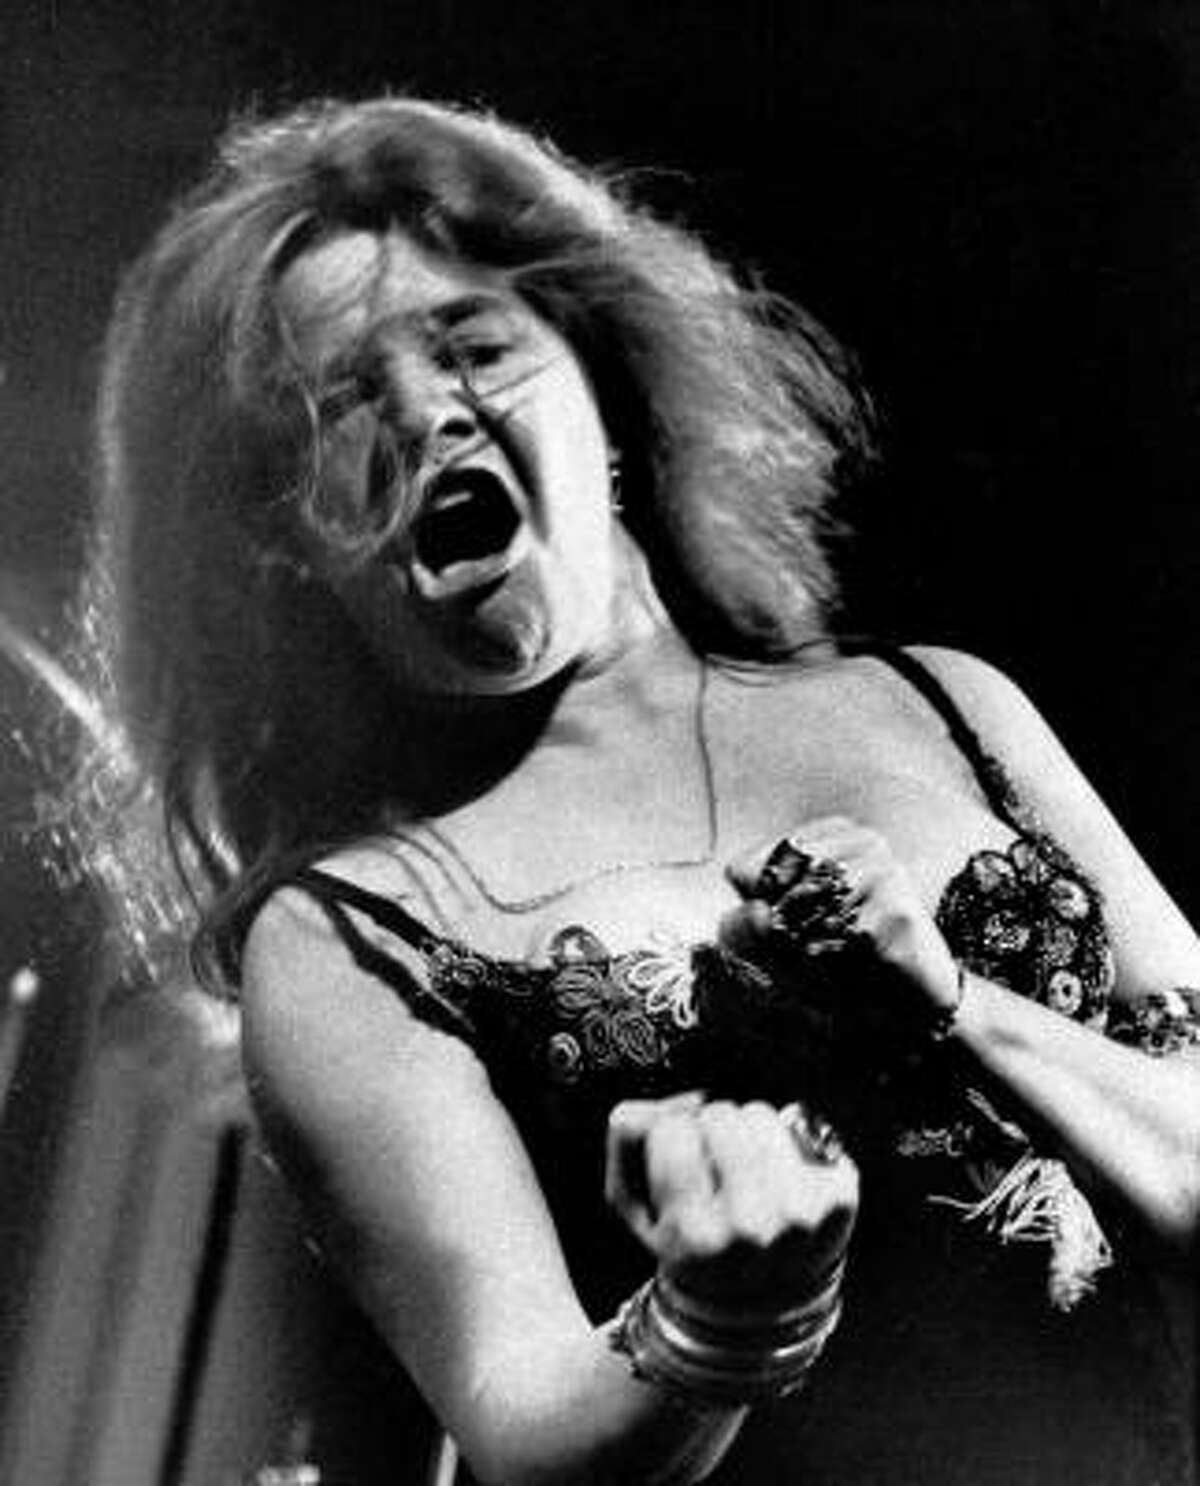 Blues/rock singer Janis Joplin performs at the Newport Folk Festival with her band Big Brother and the Holding Company on July 29, 1968. She died in 1970 at age 27.